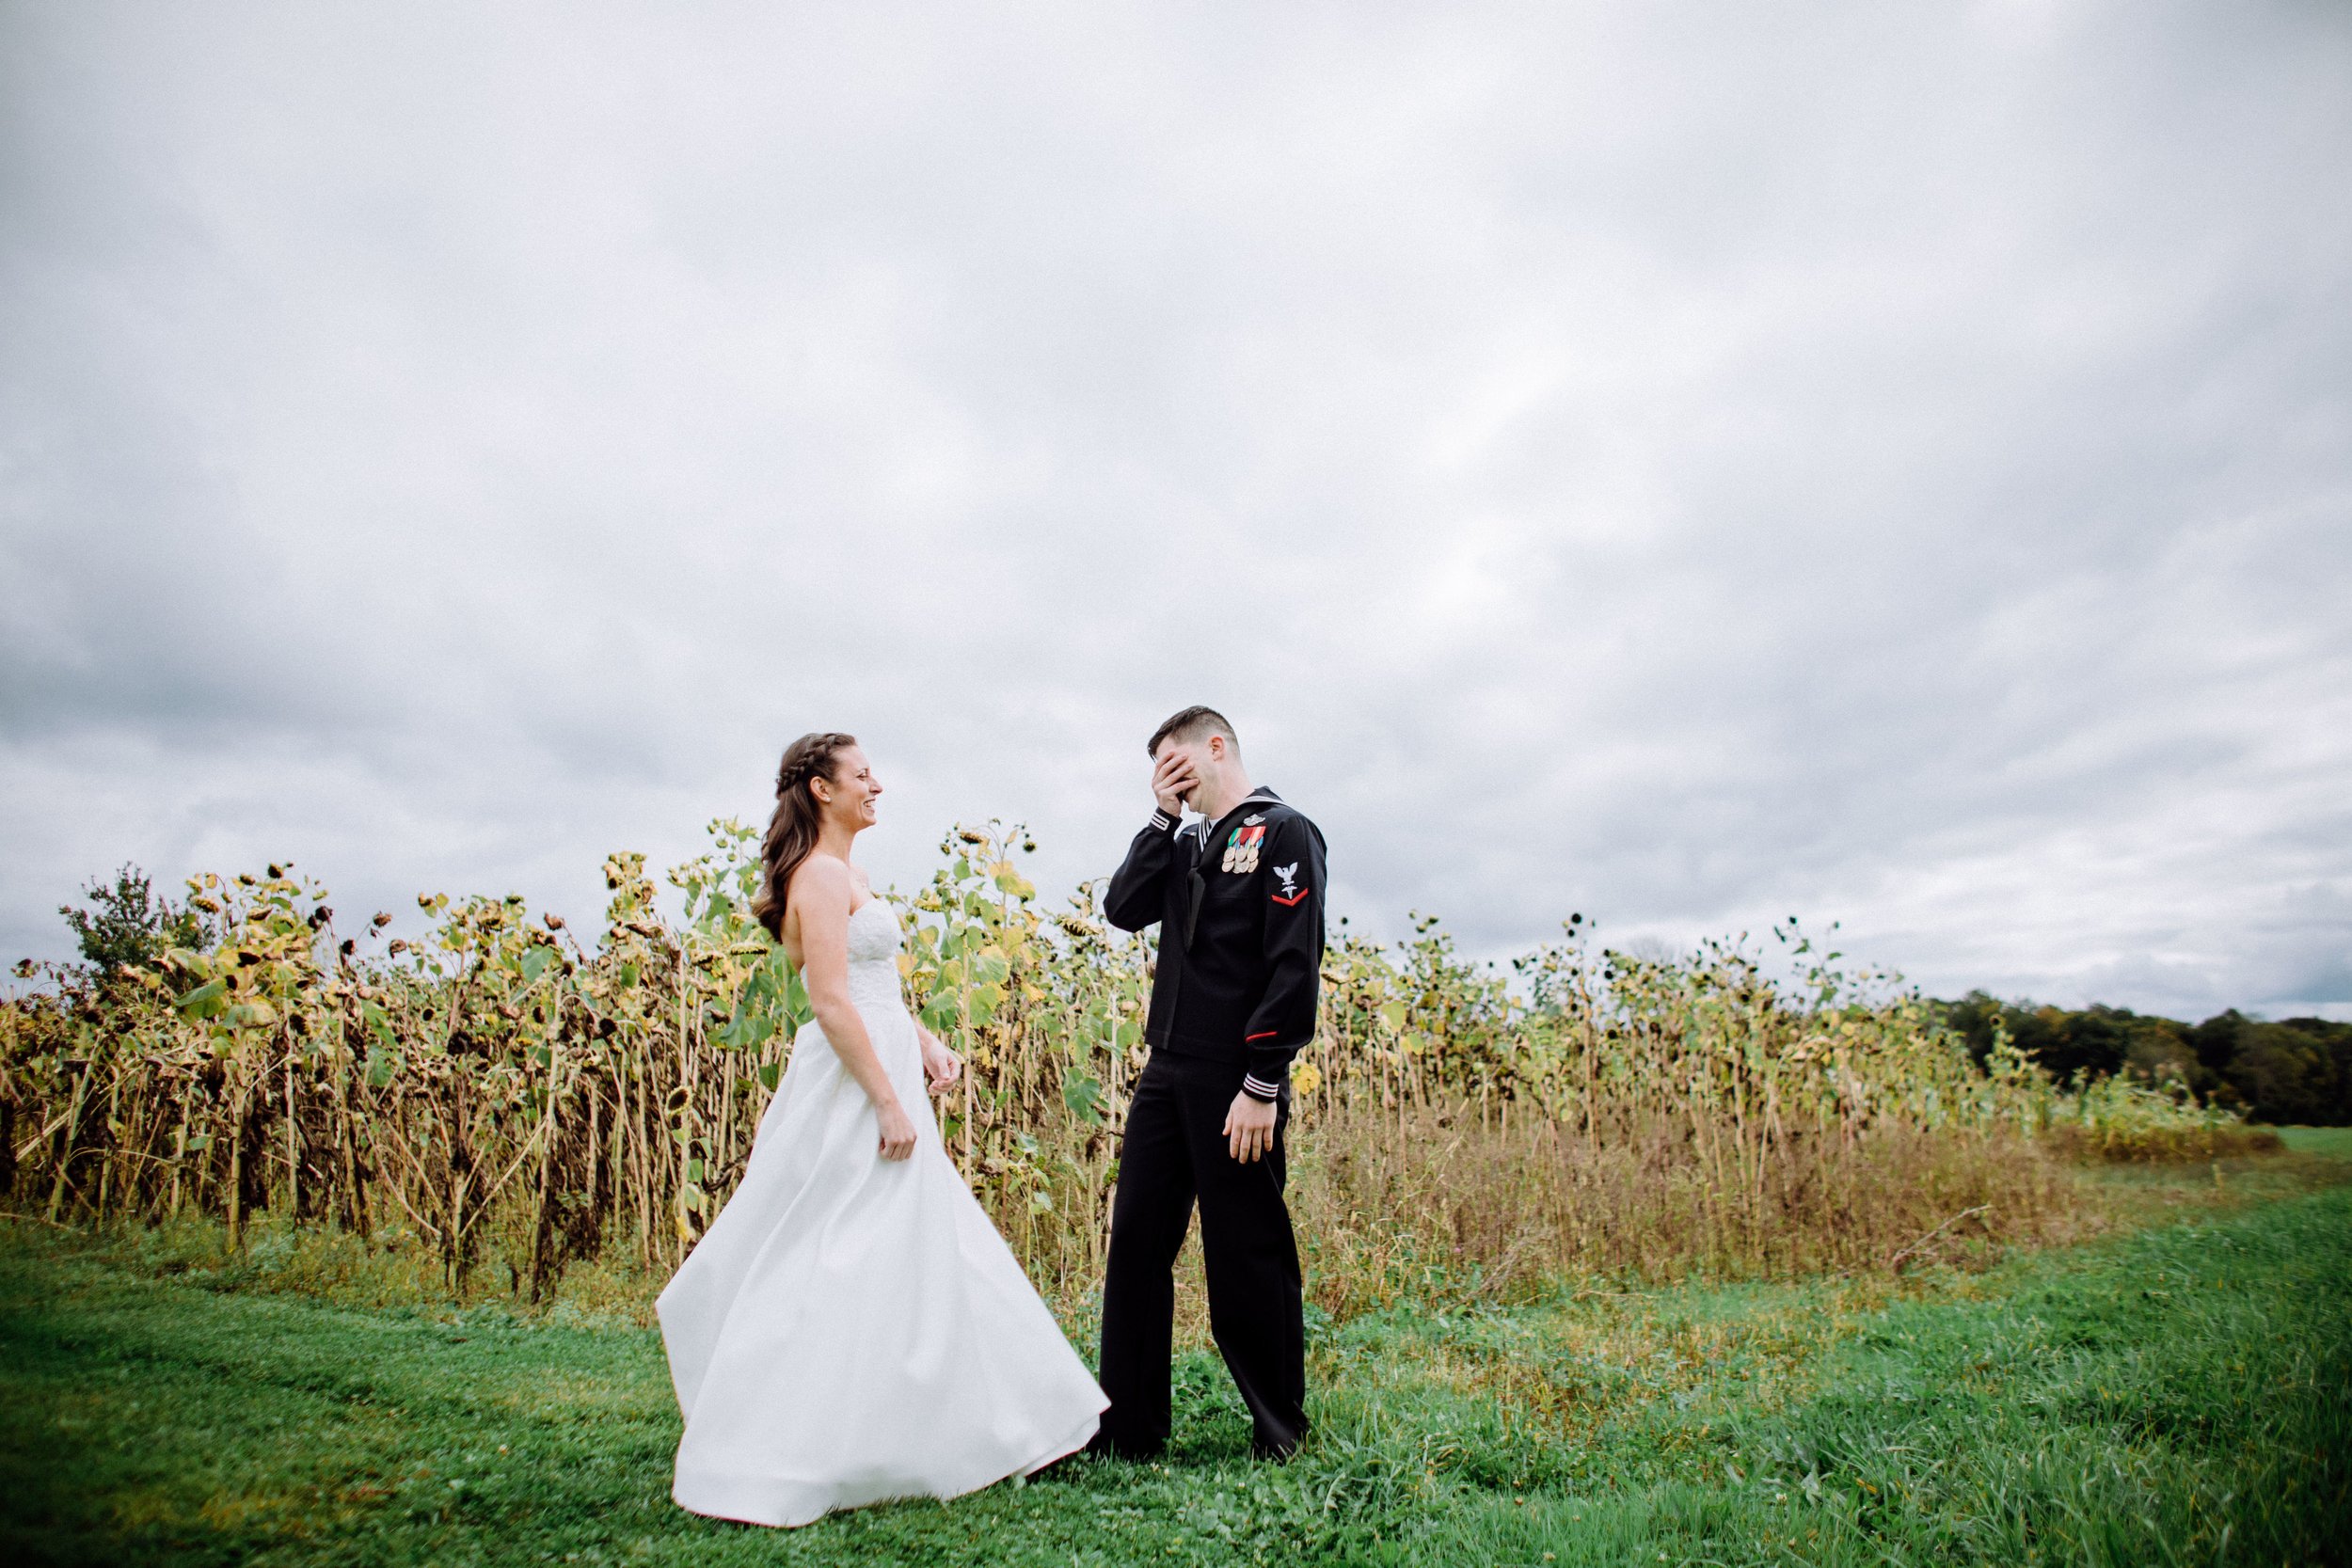 Brenna and Jake Wedding Photography at Akron Acres by Stefan Ludwig Photography-63.jpg